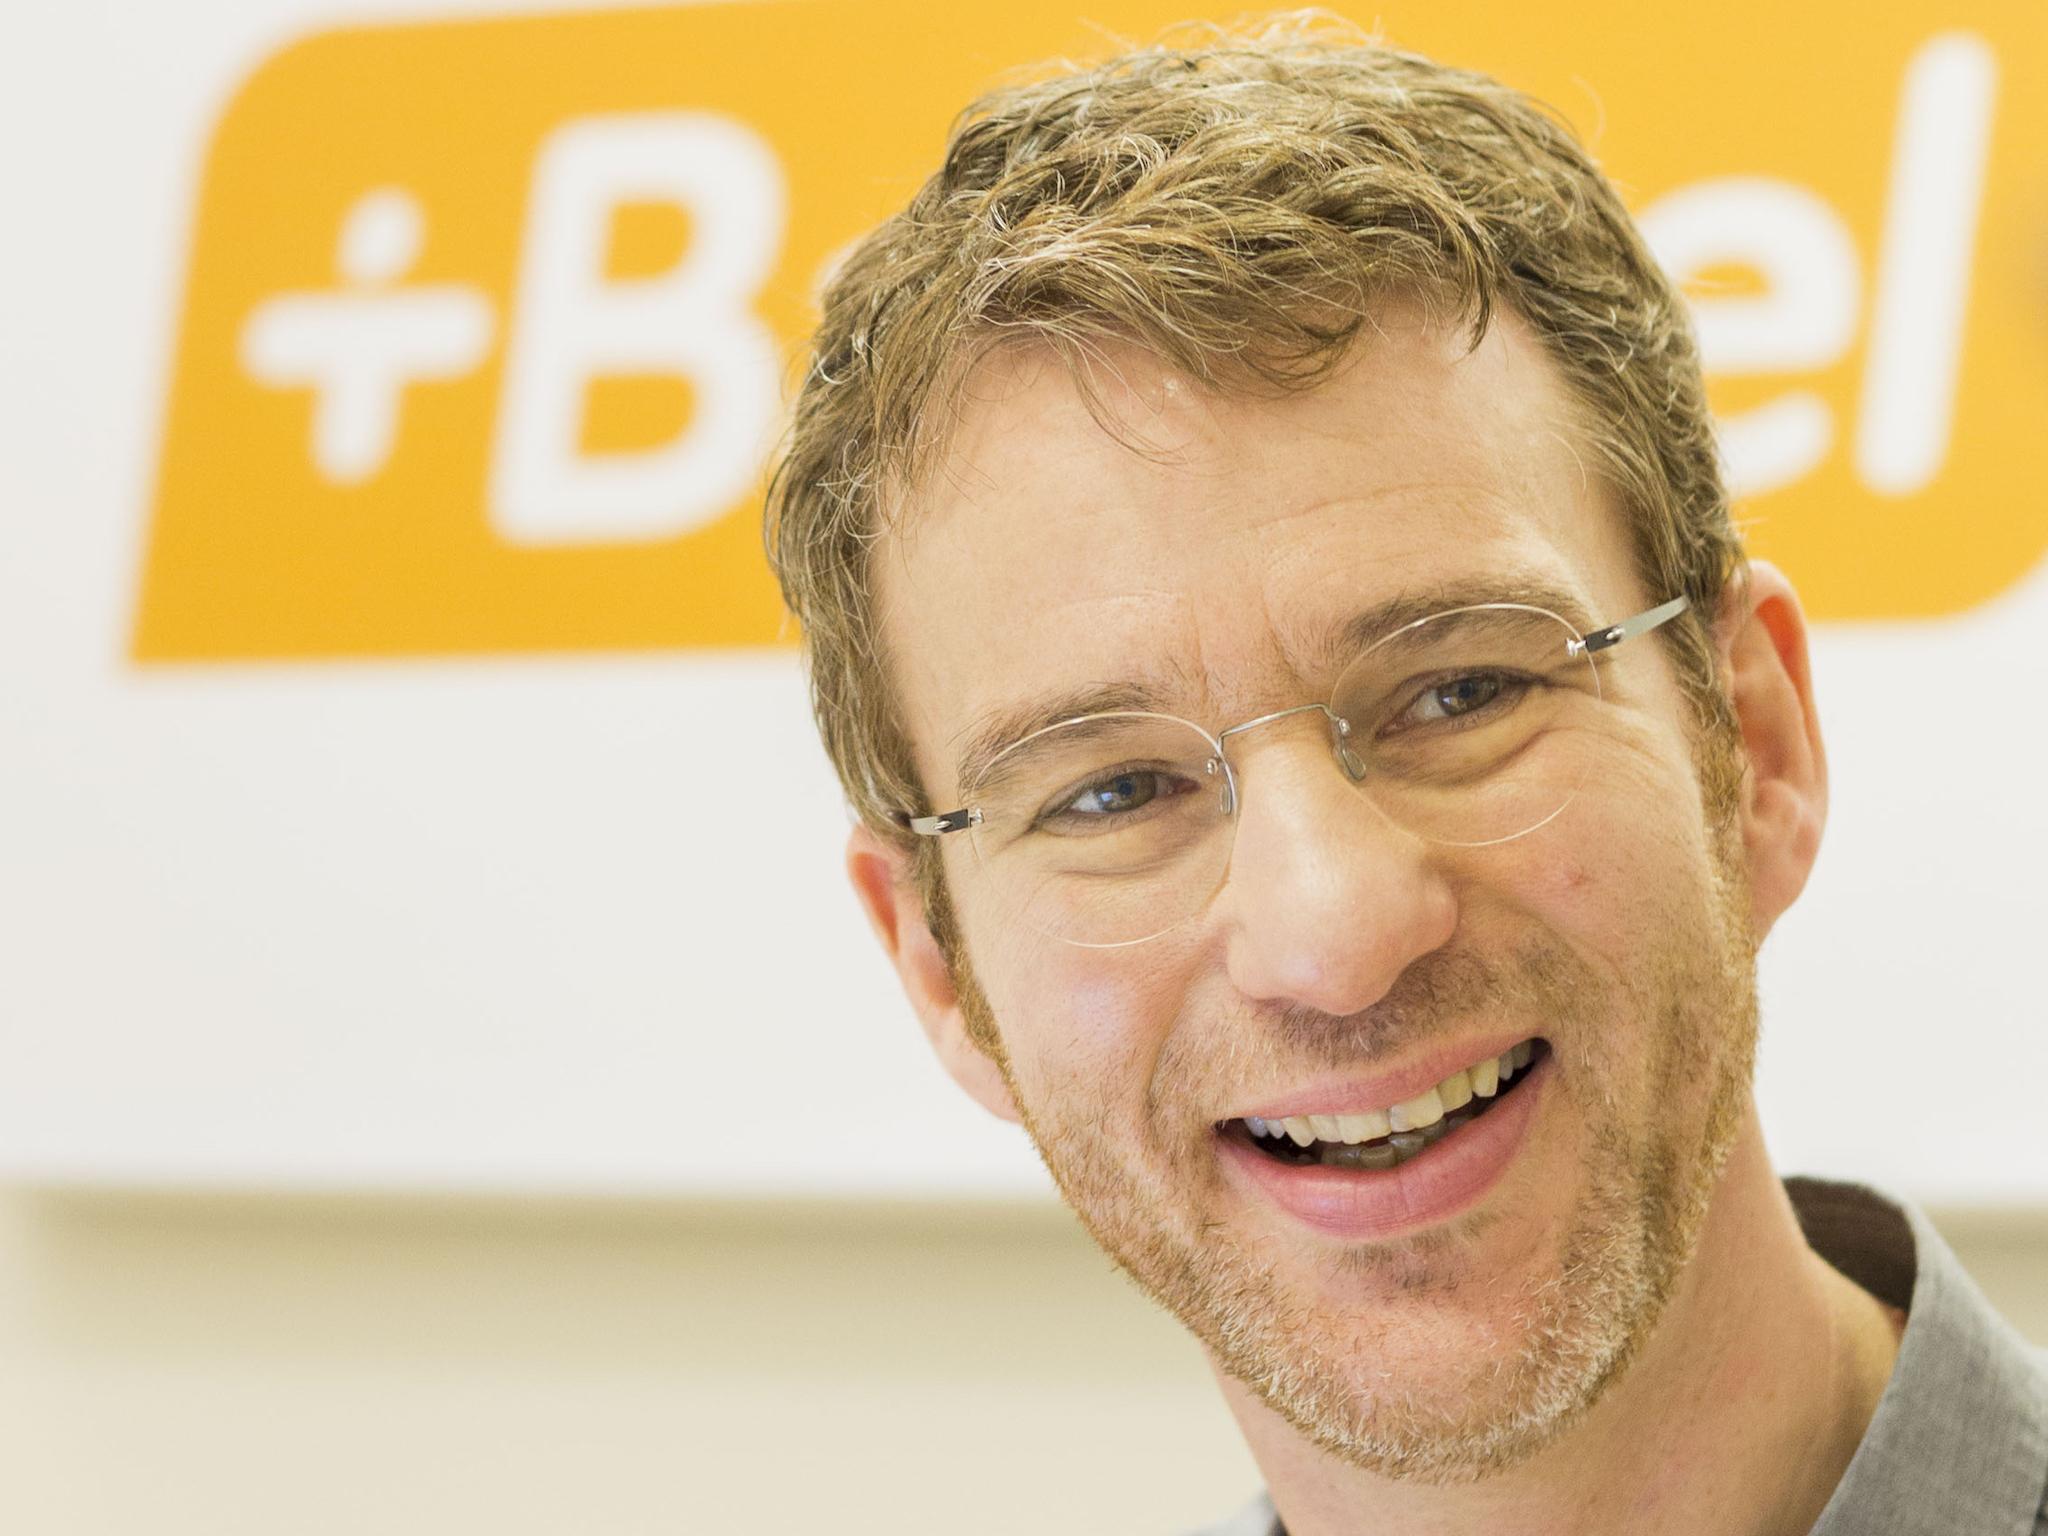 Markus Witte, co-founder of Babbel, a language-learning app